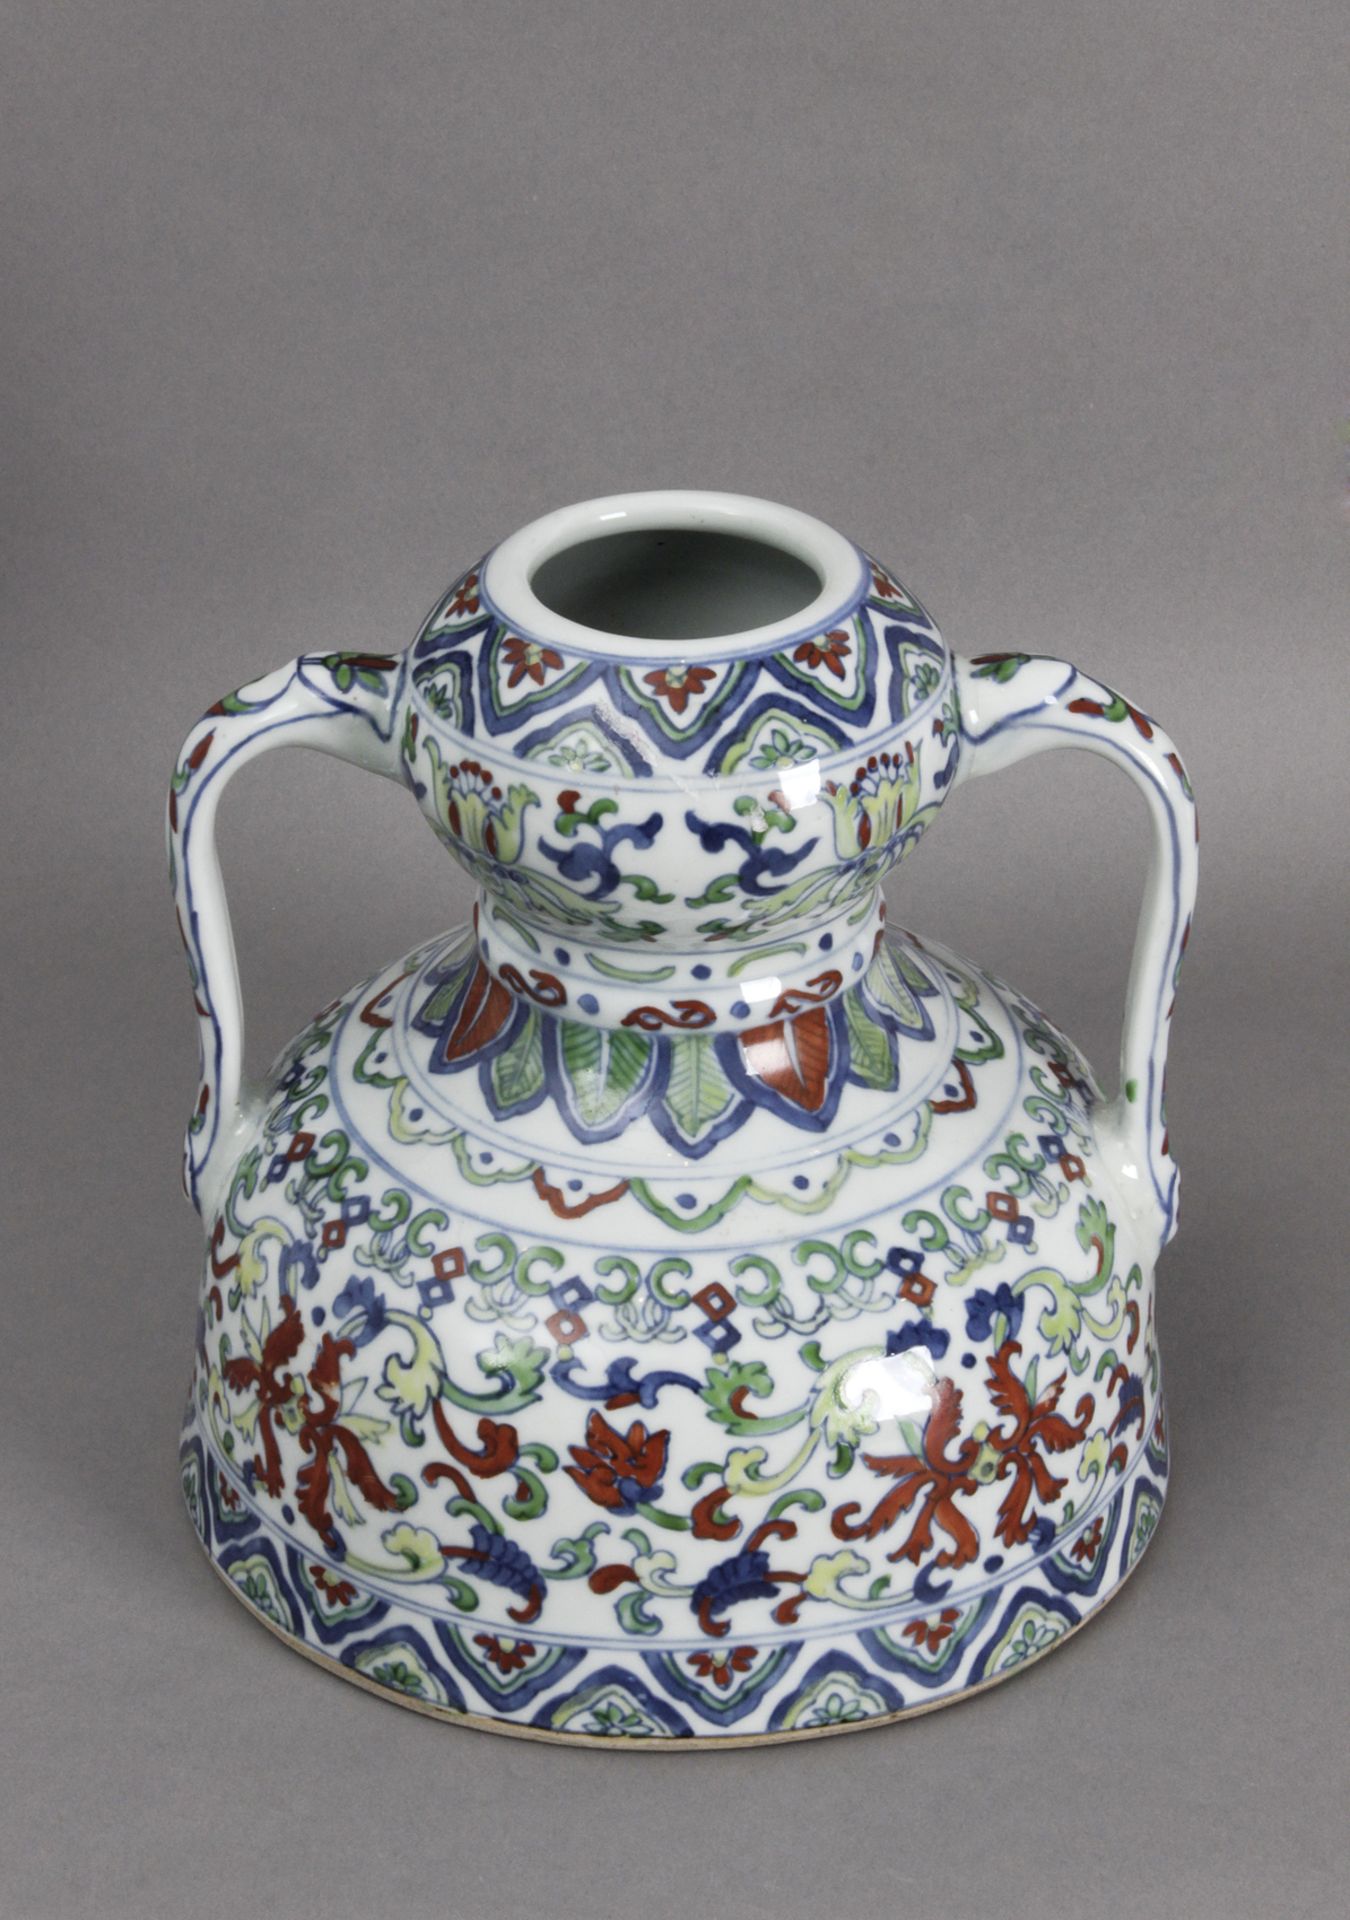 A 20th century Chinese Famille Rose porcelain vase from the Republic period - Image 2 of 5